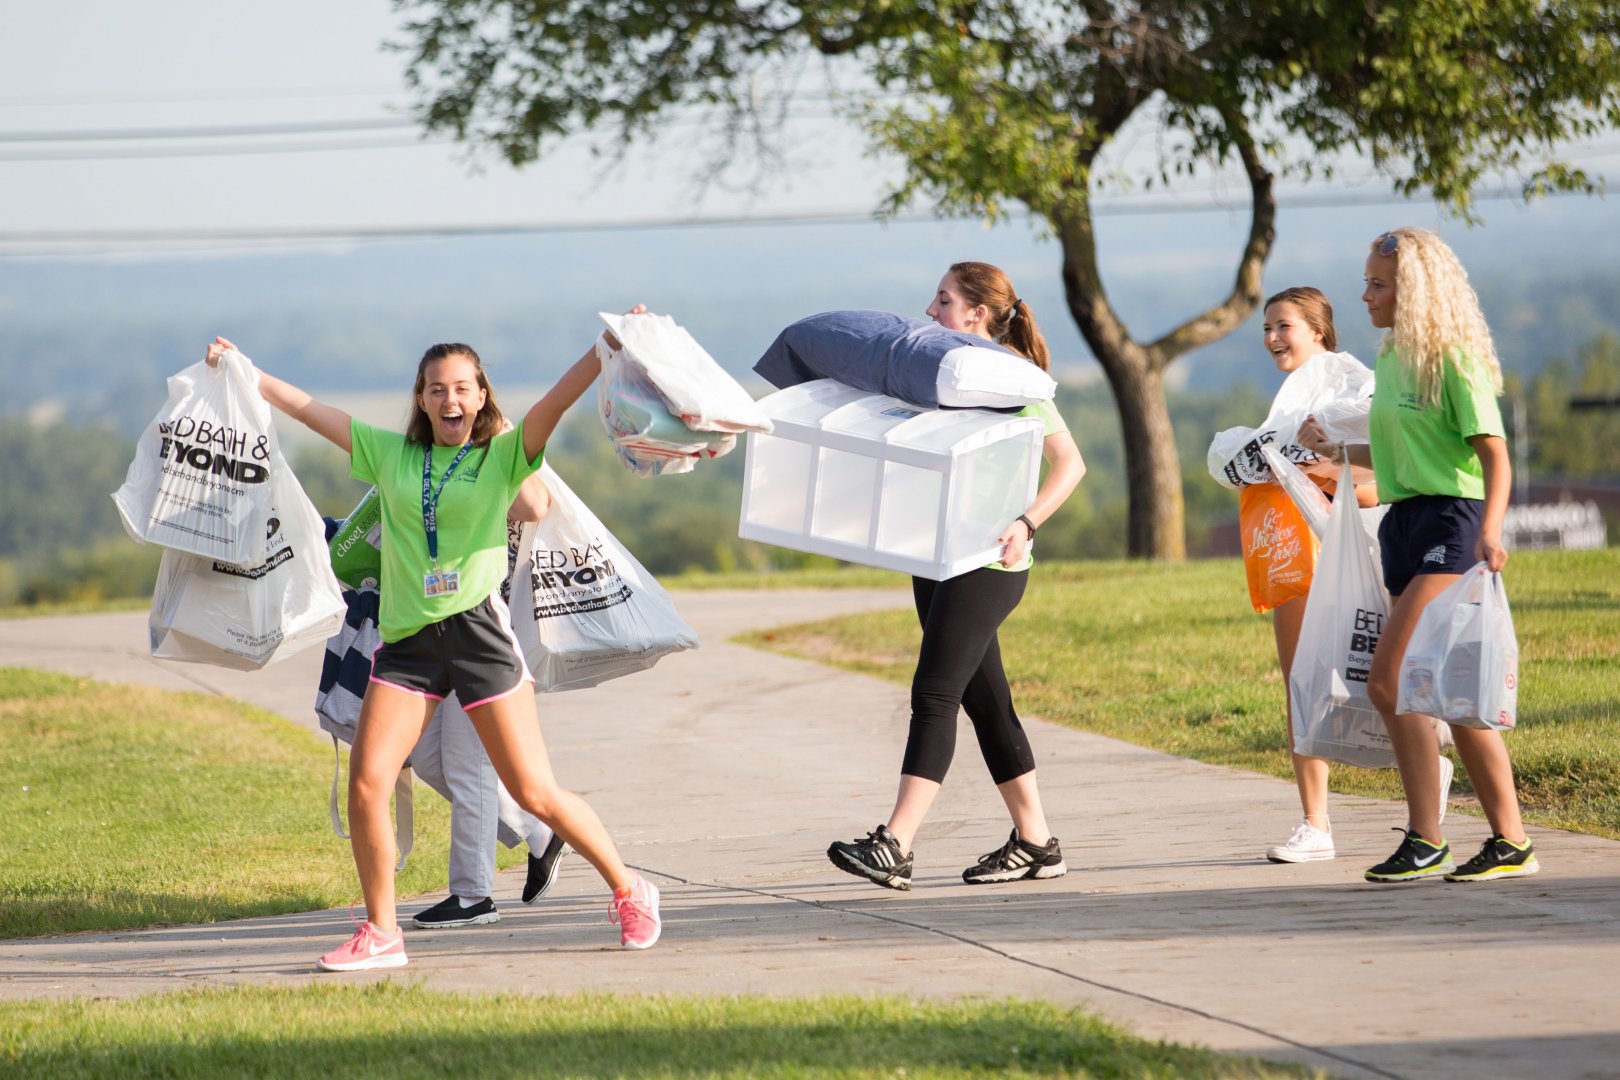 Students smiling after returning with apartments supplies